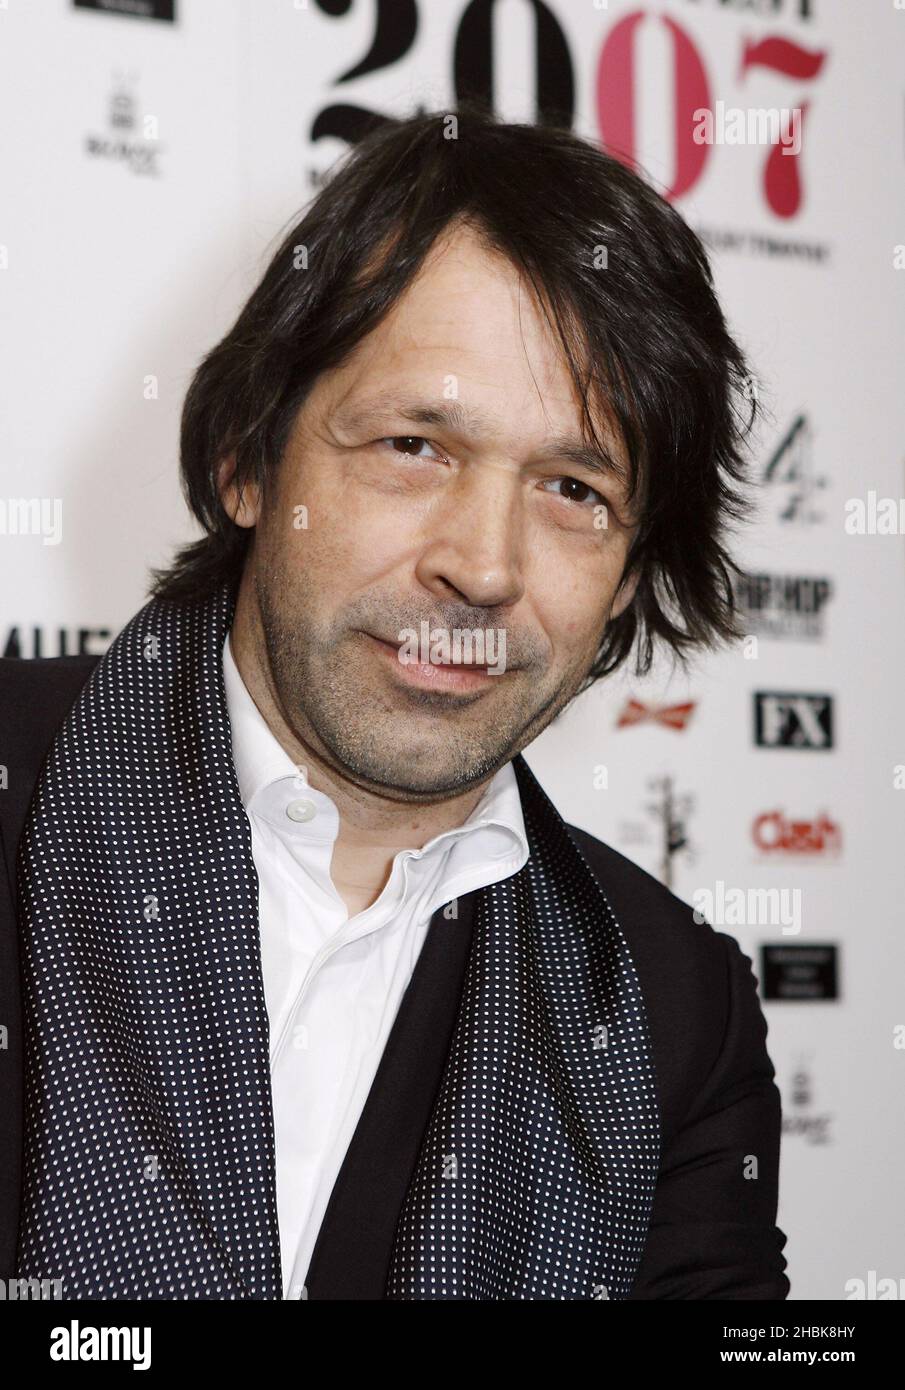 Peter Saville arrives at the Diesel U Music Awards for unsigned talent, held at KoKo in Camden, north London. Stock Photo